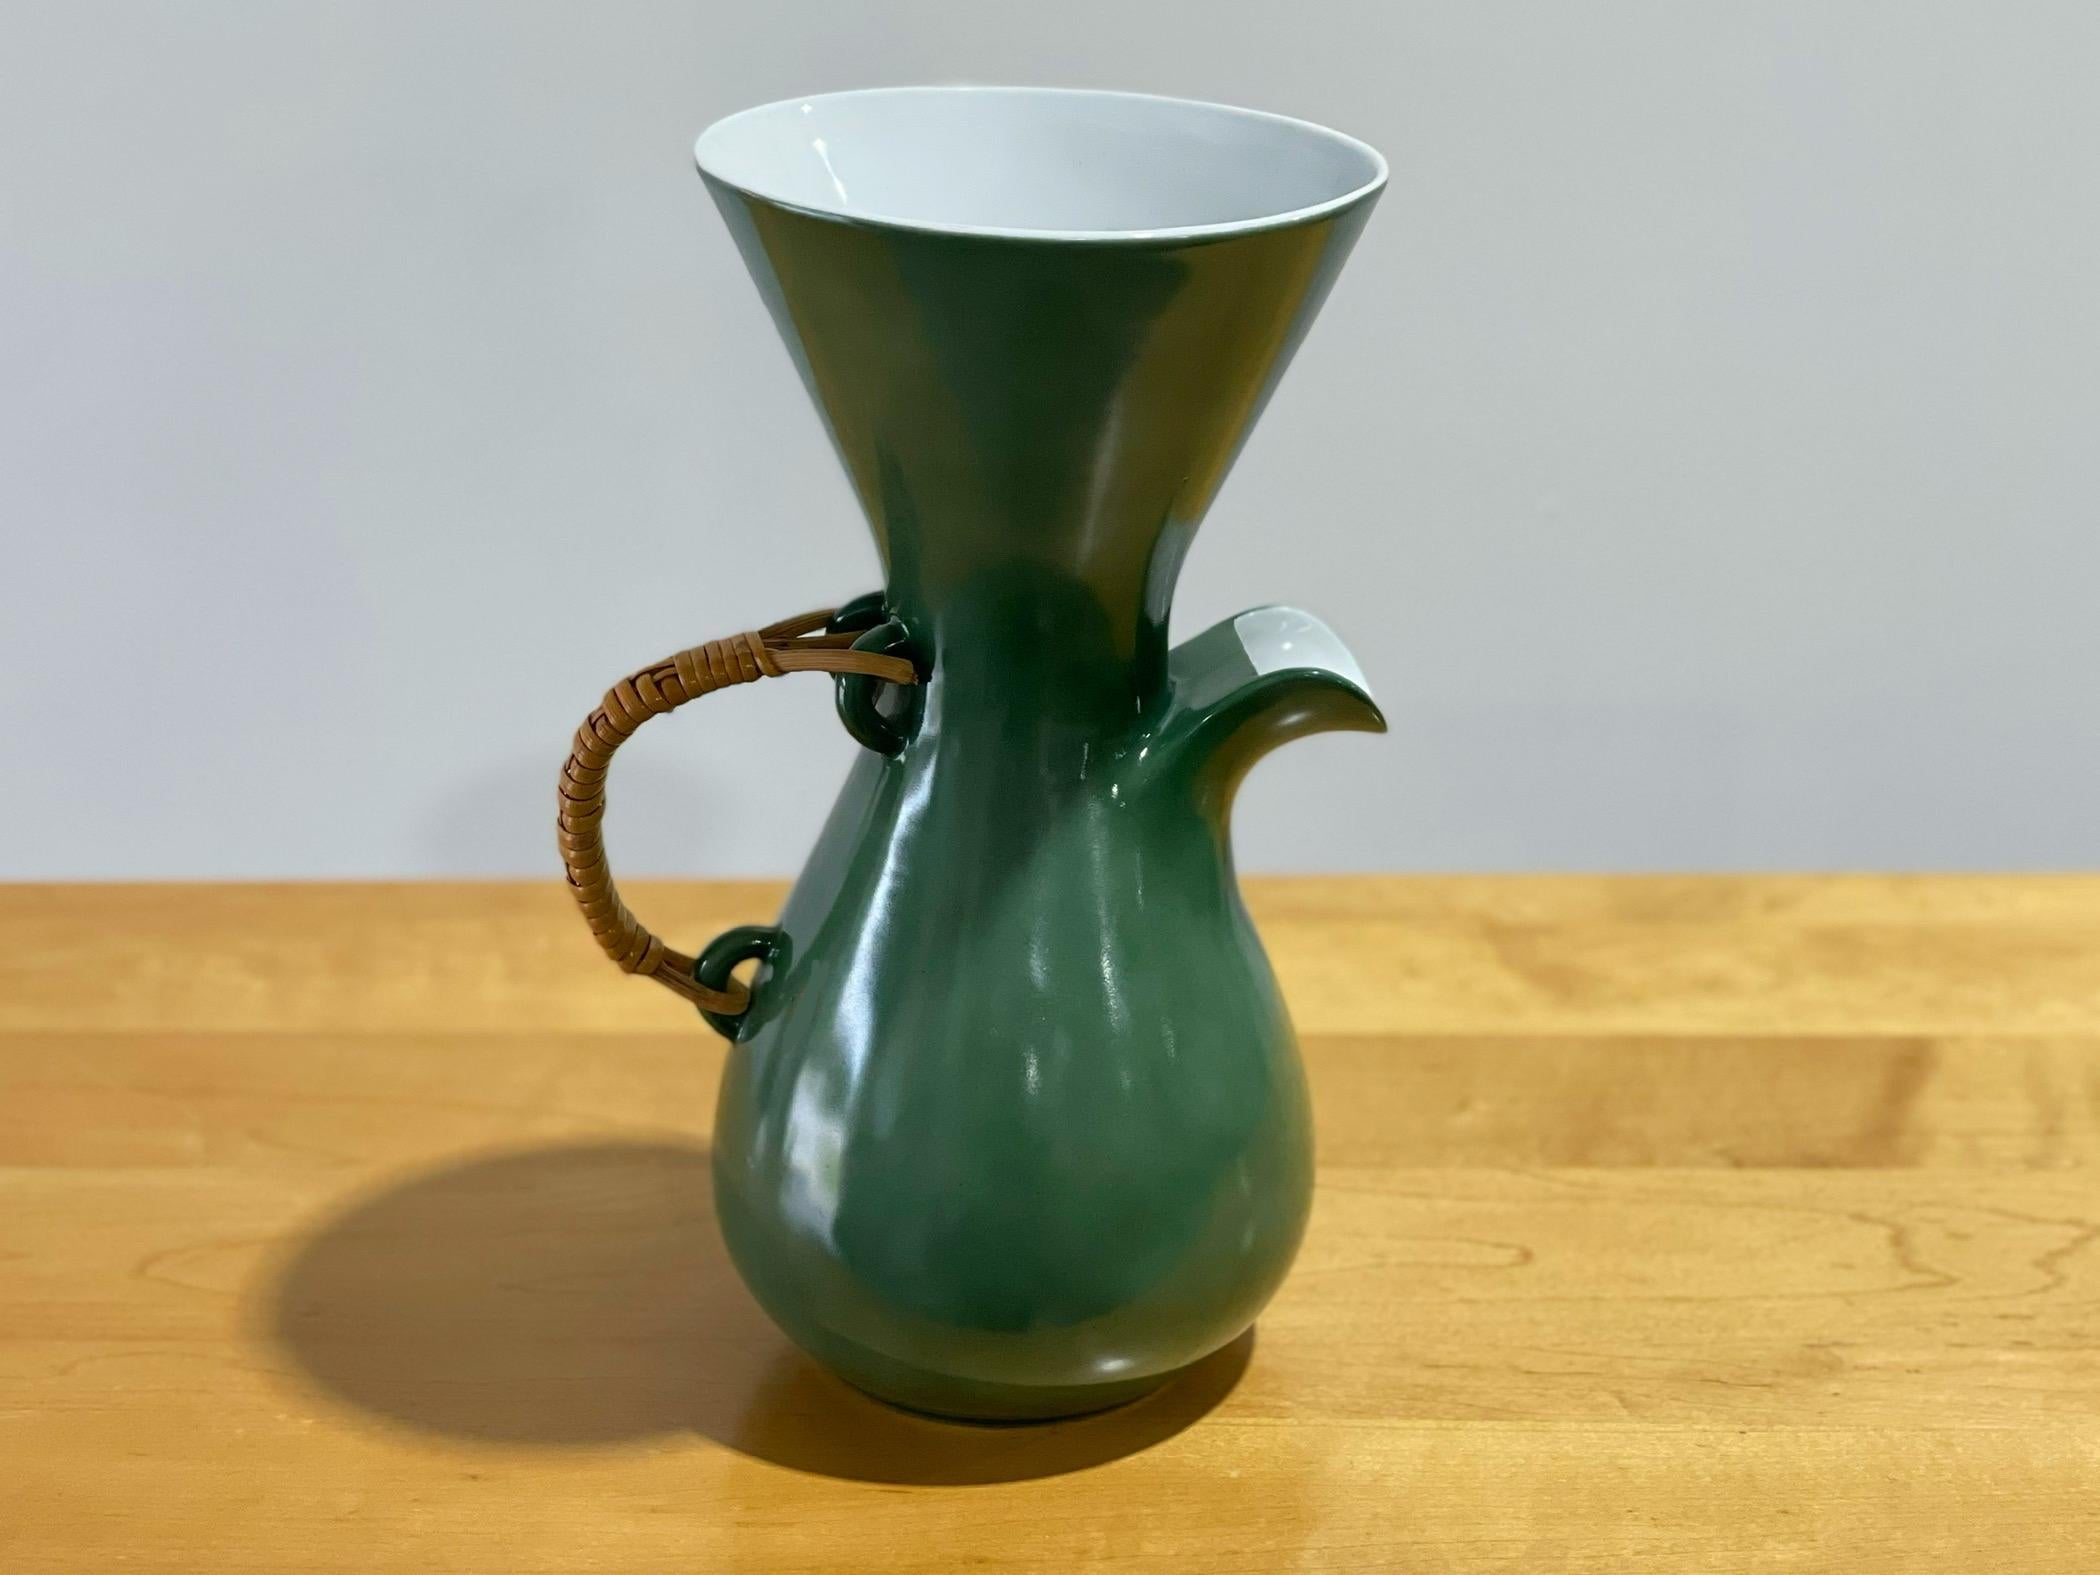 Exquisite modernist coffee carafe designed by Kenji Fujita for Freeman Lederman. Beverage pitcher in rare green glaze with glossy white interior. Marked with the FL logo. 
Excellent condition - no issues of note
This will be professionally packaged,